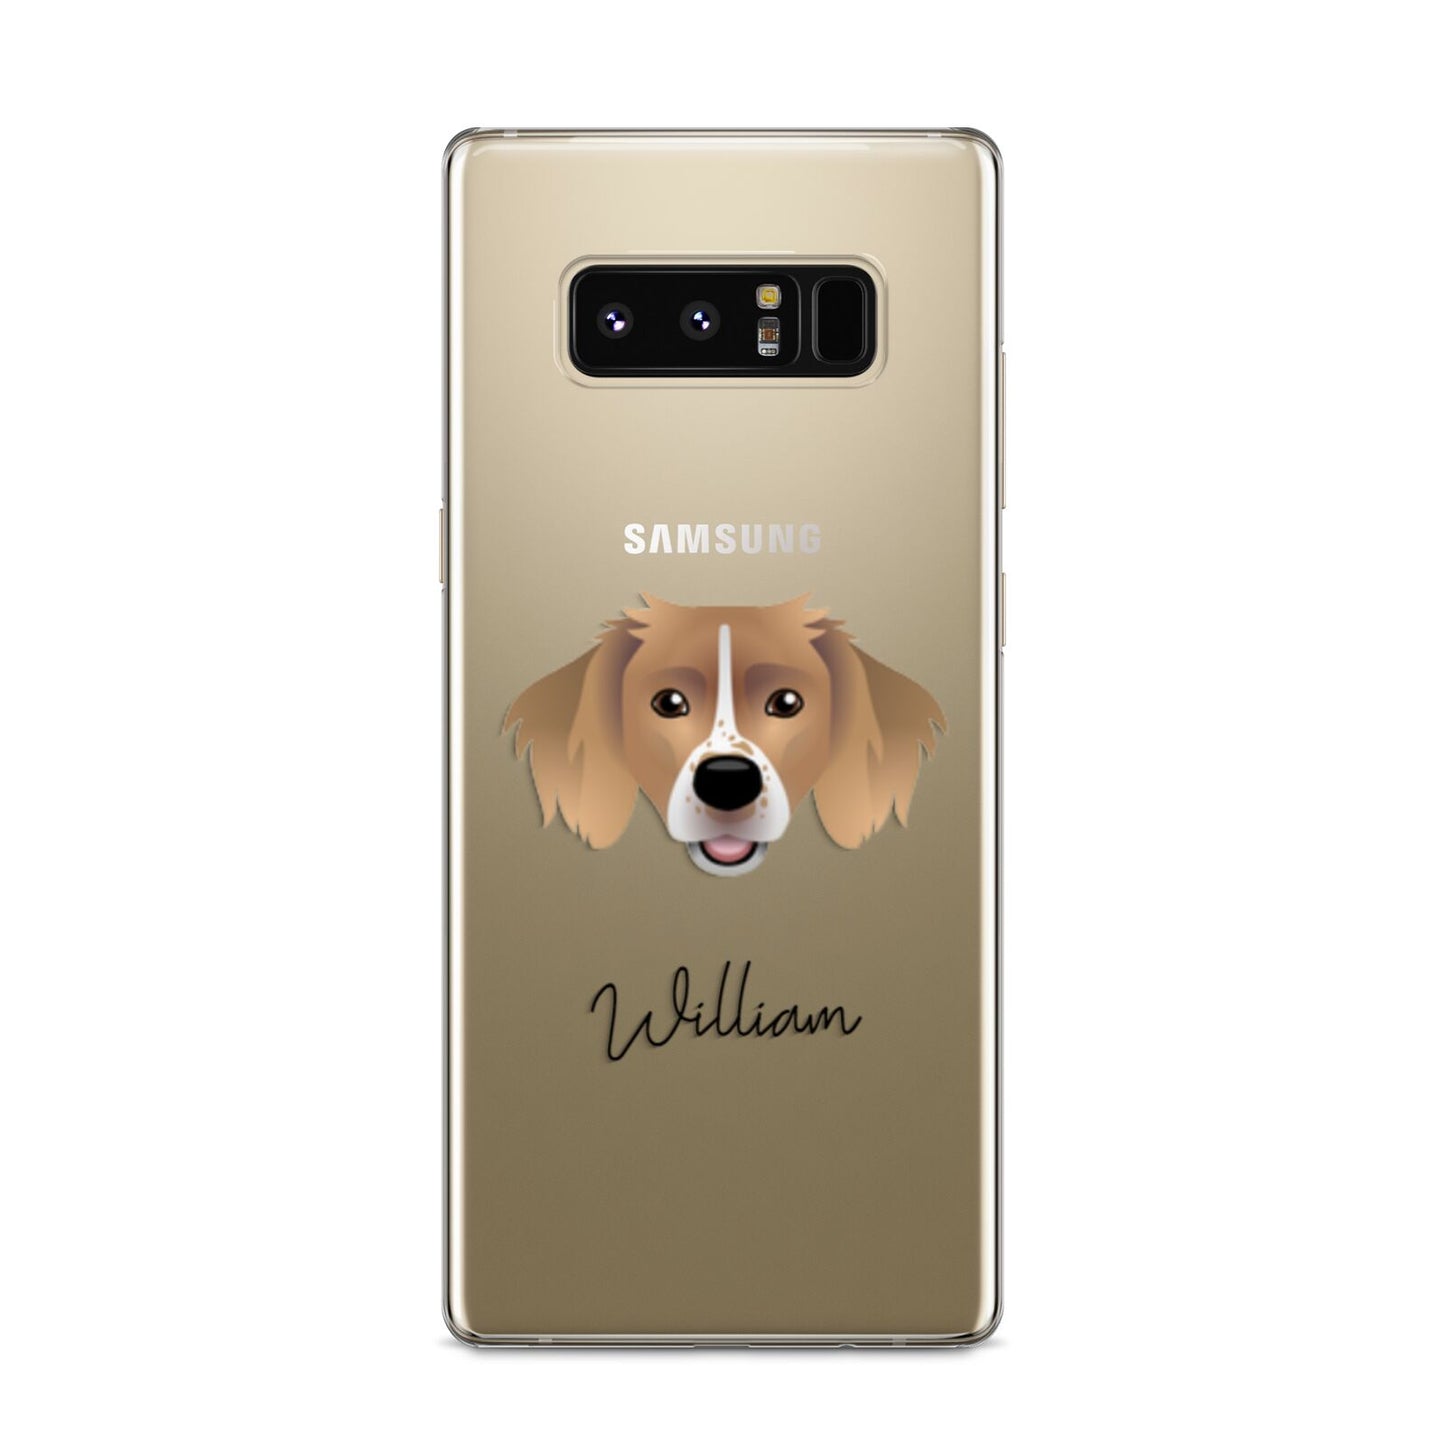 Sprollie Personalised Samsung Galaxy S8 Case